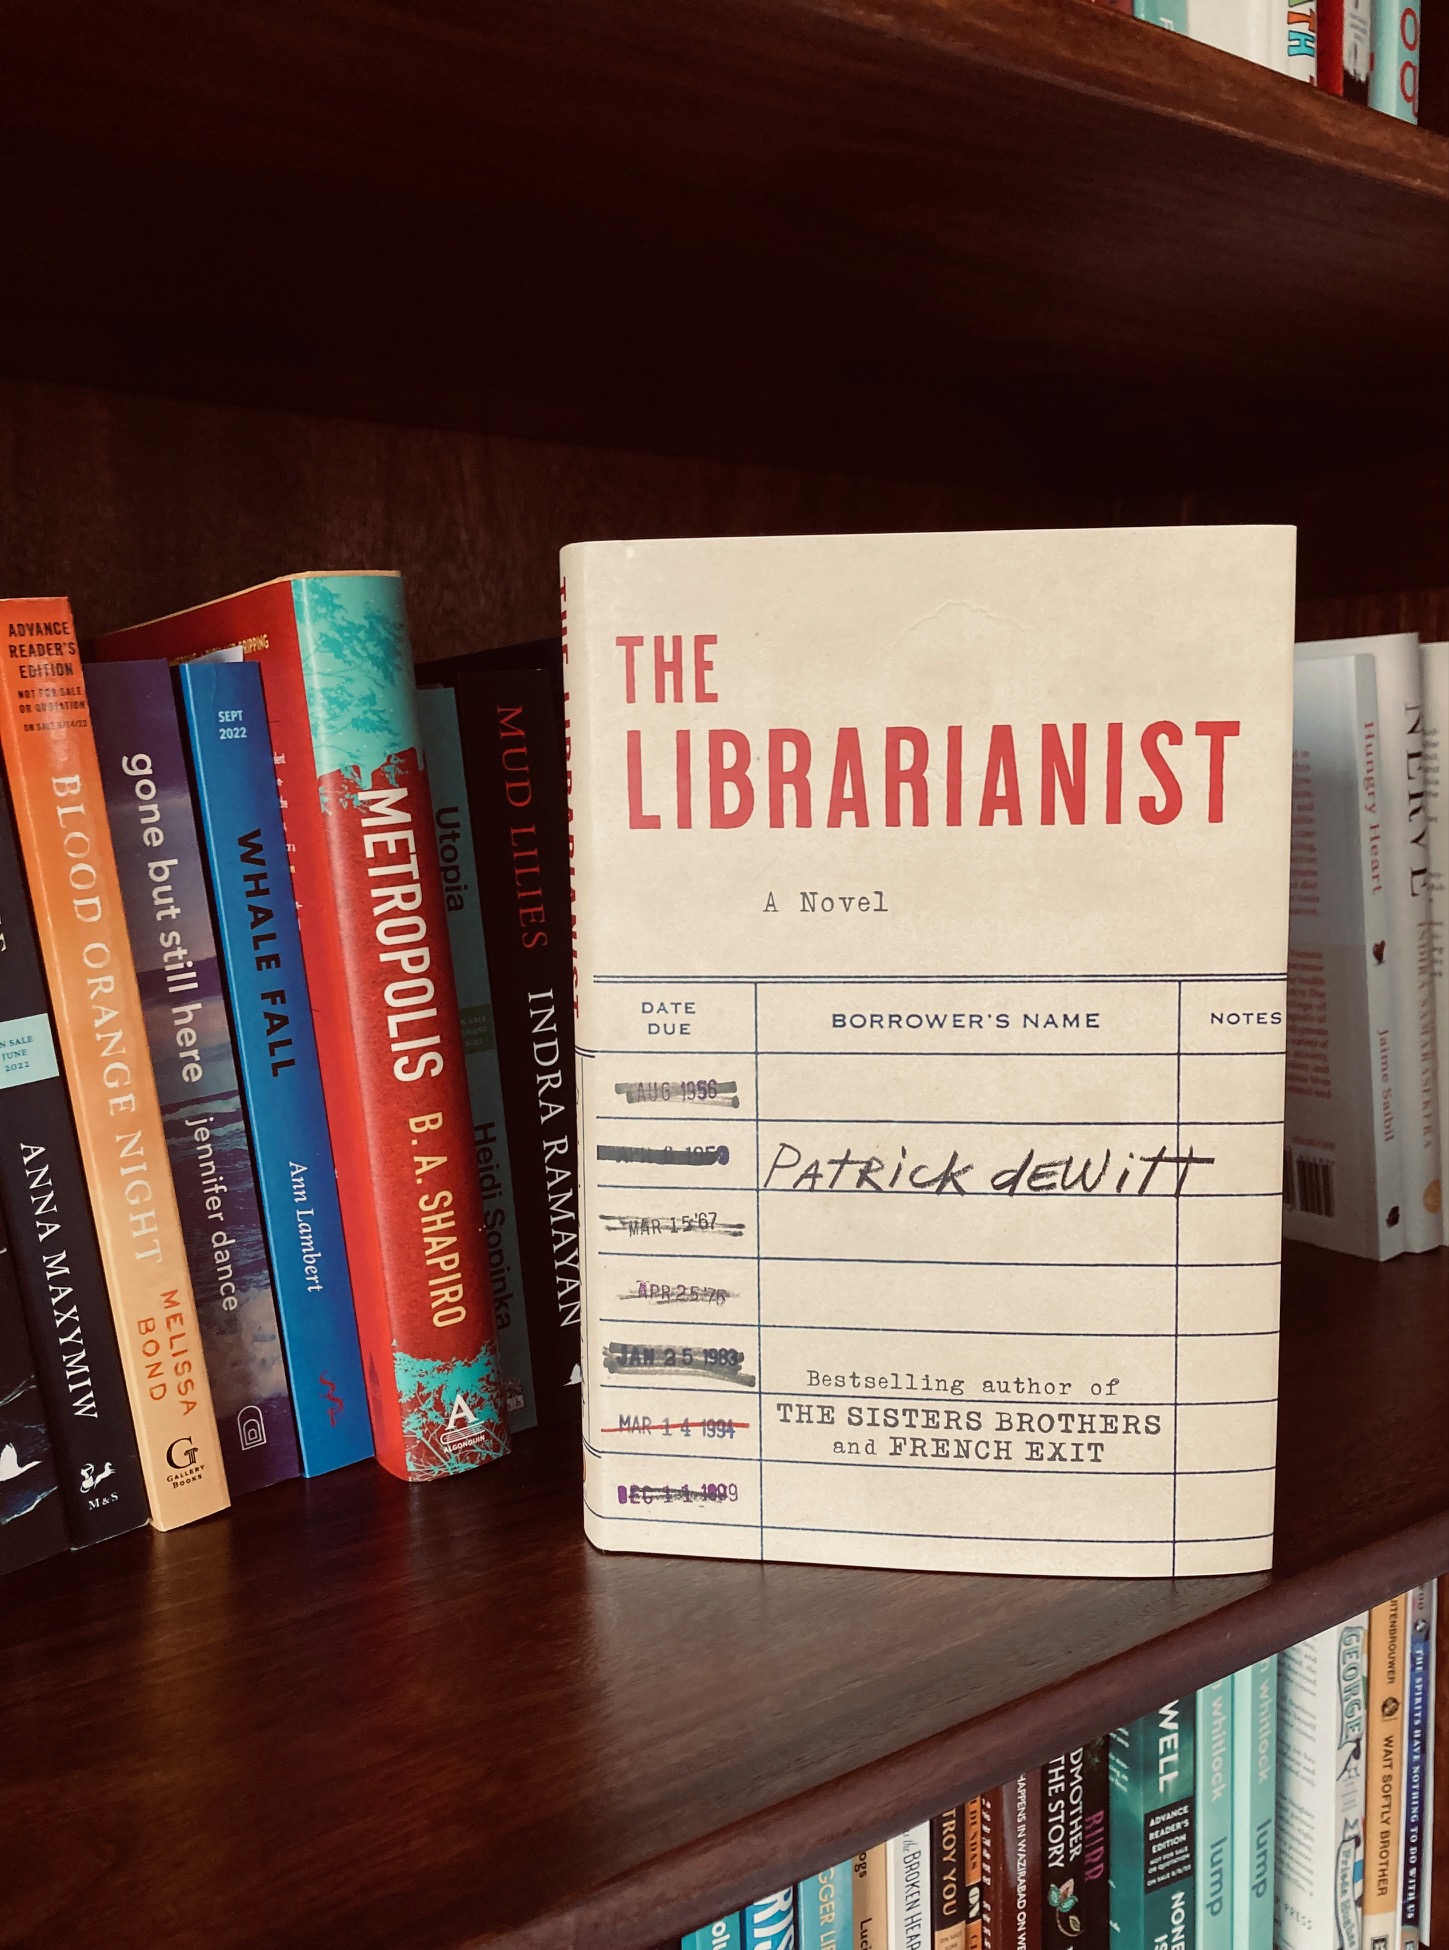 The Librarianist by Patrick deWitt book pictured on a book shelf in front of other books